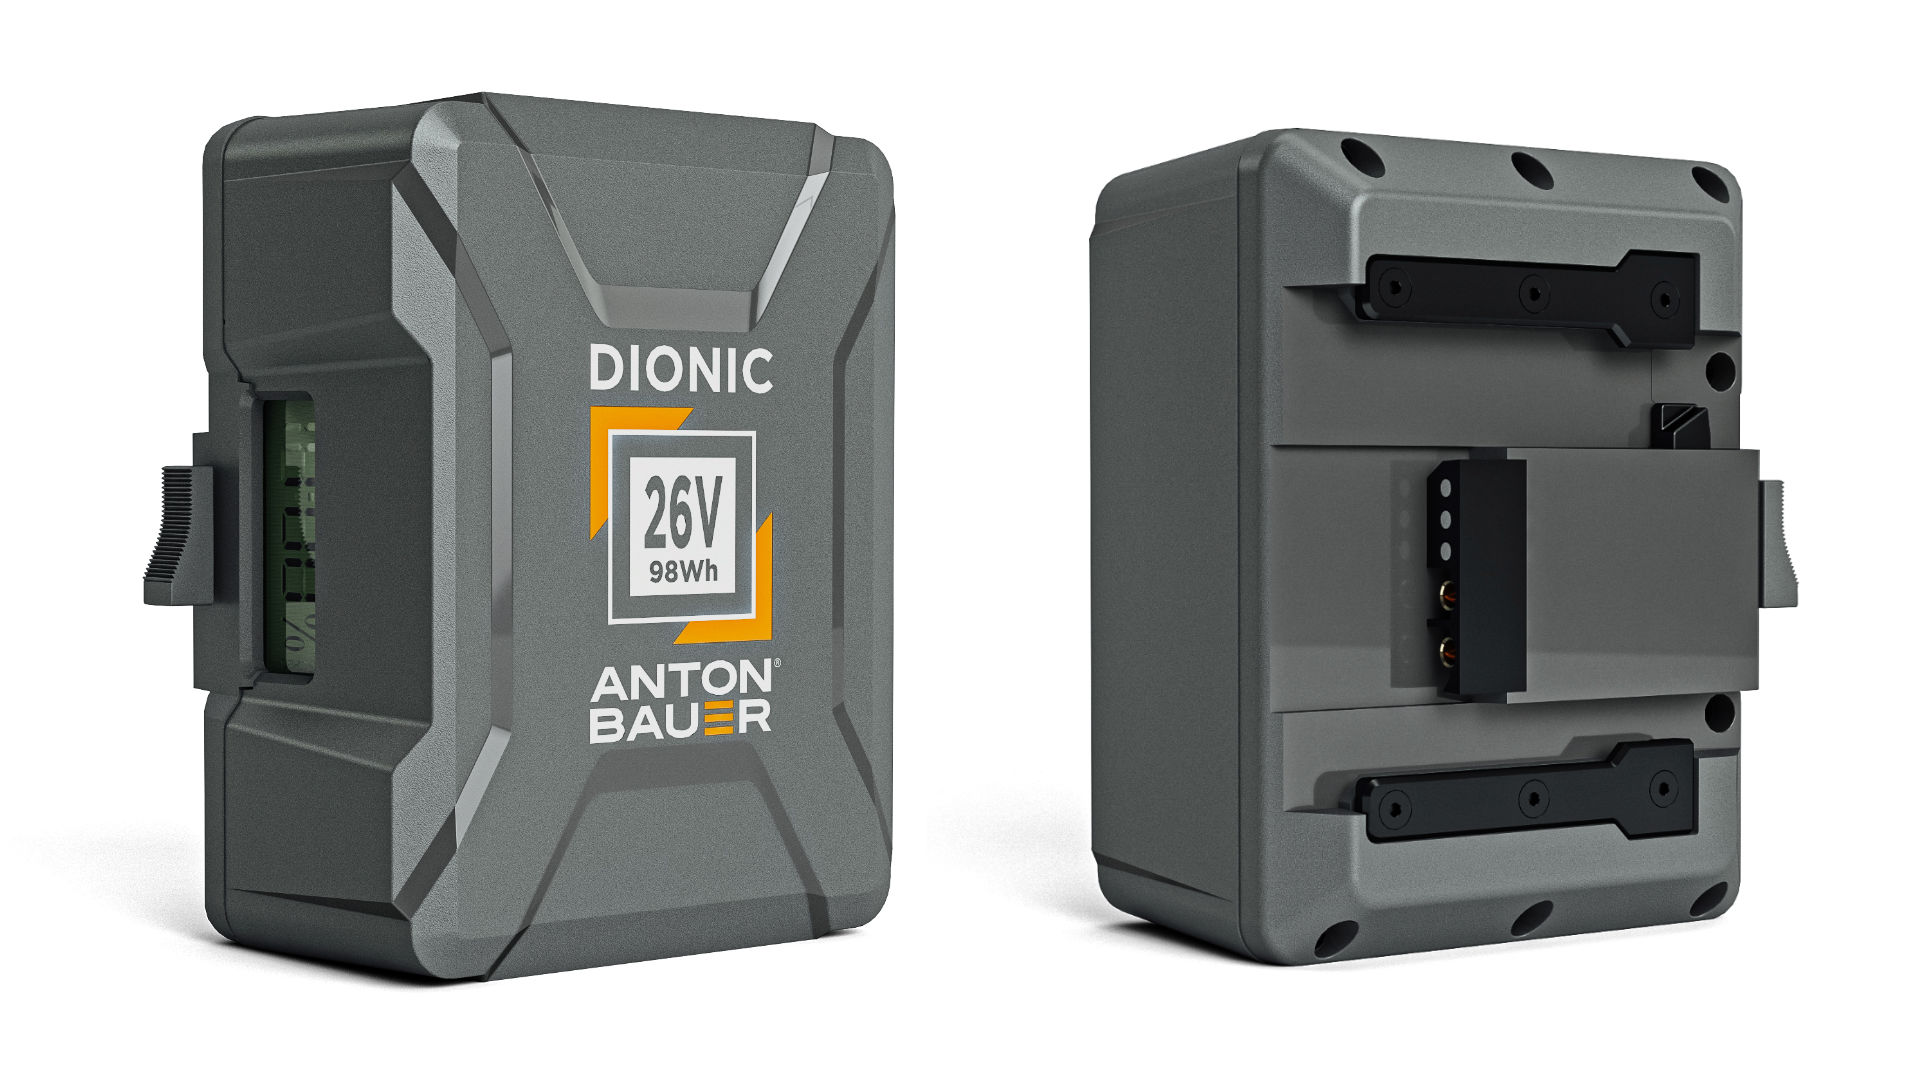 Anton Bauer dionic 26v series battery